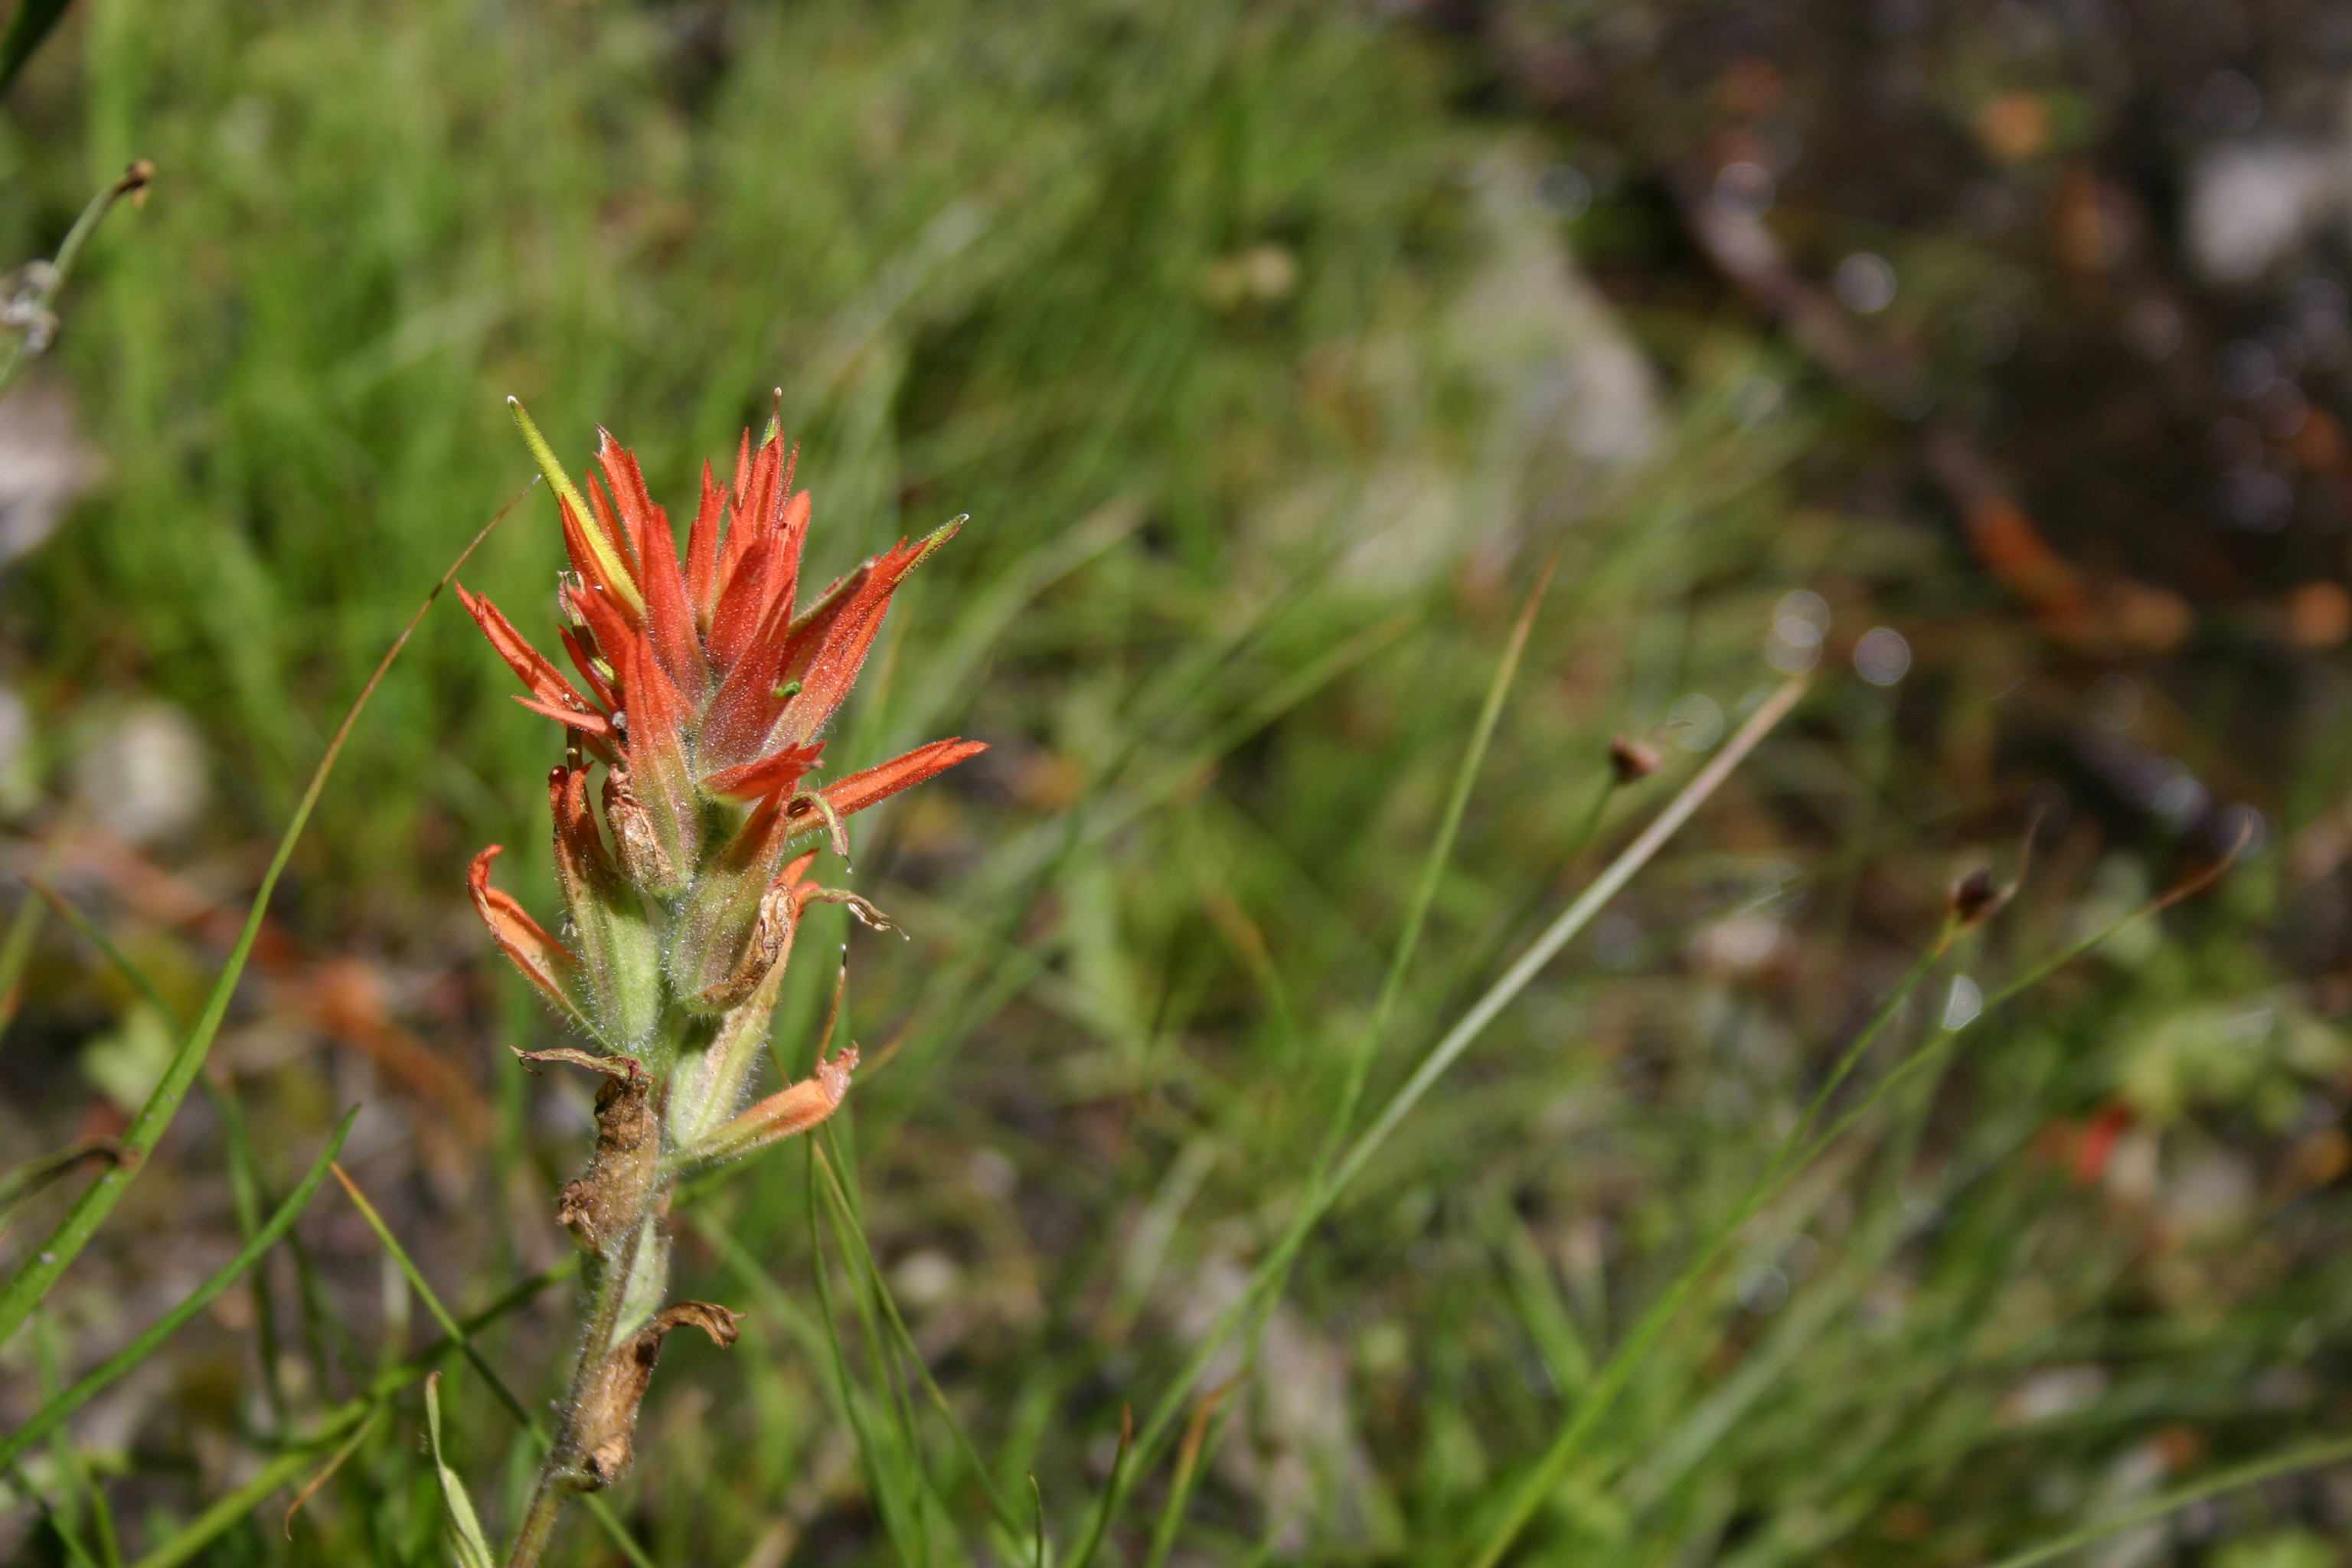 A red wildflower near Mammoth Lakes. It resembles Indian Paintbrush, but I'm not sure what it is. 